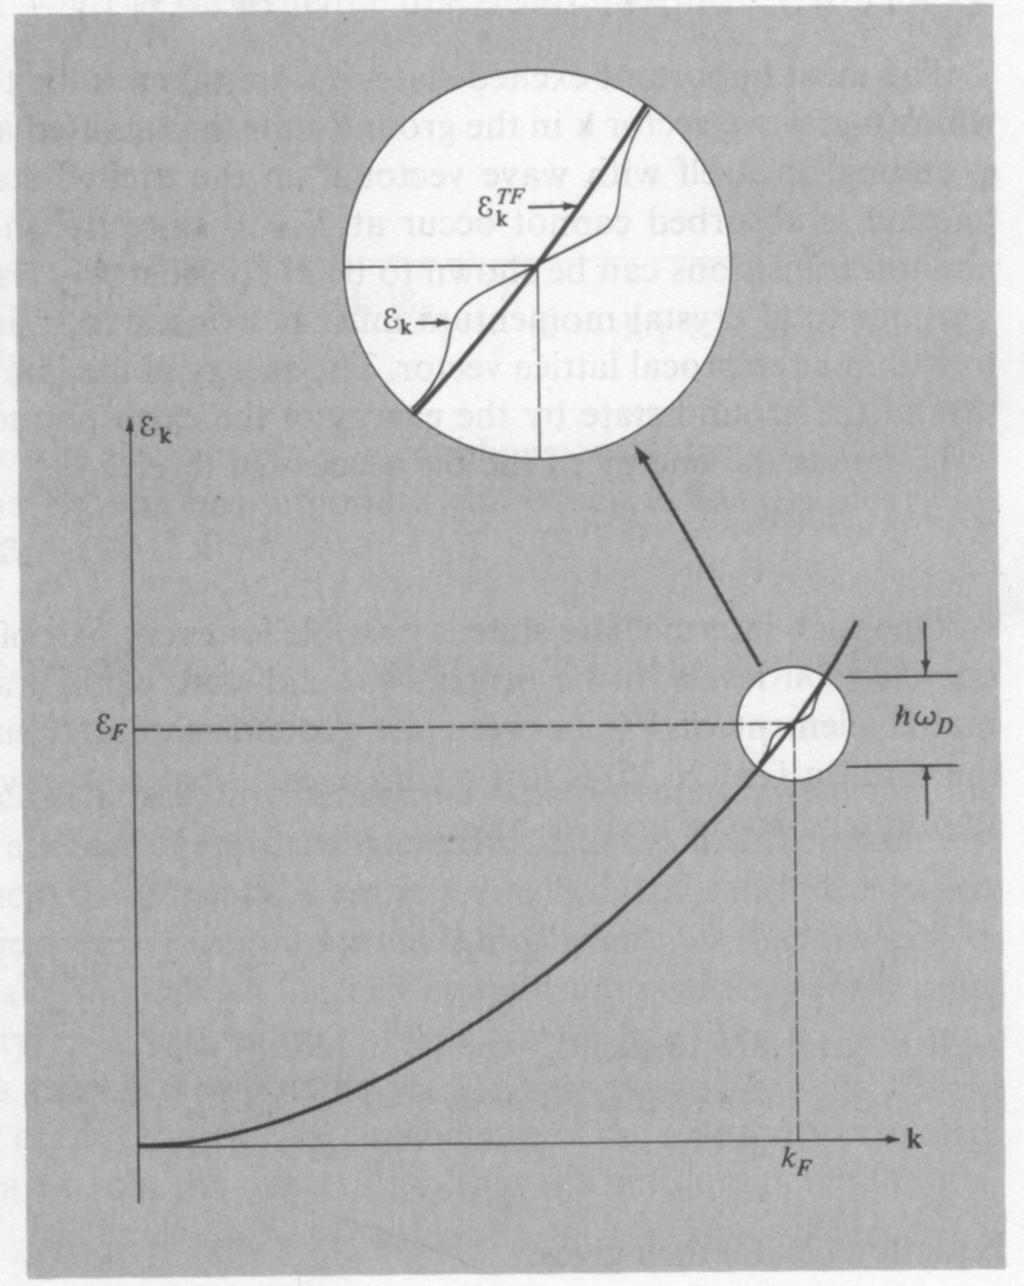 Ashcroft and Mermin Solid State Physics